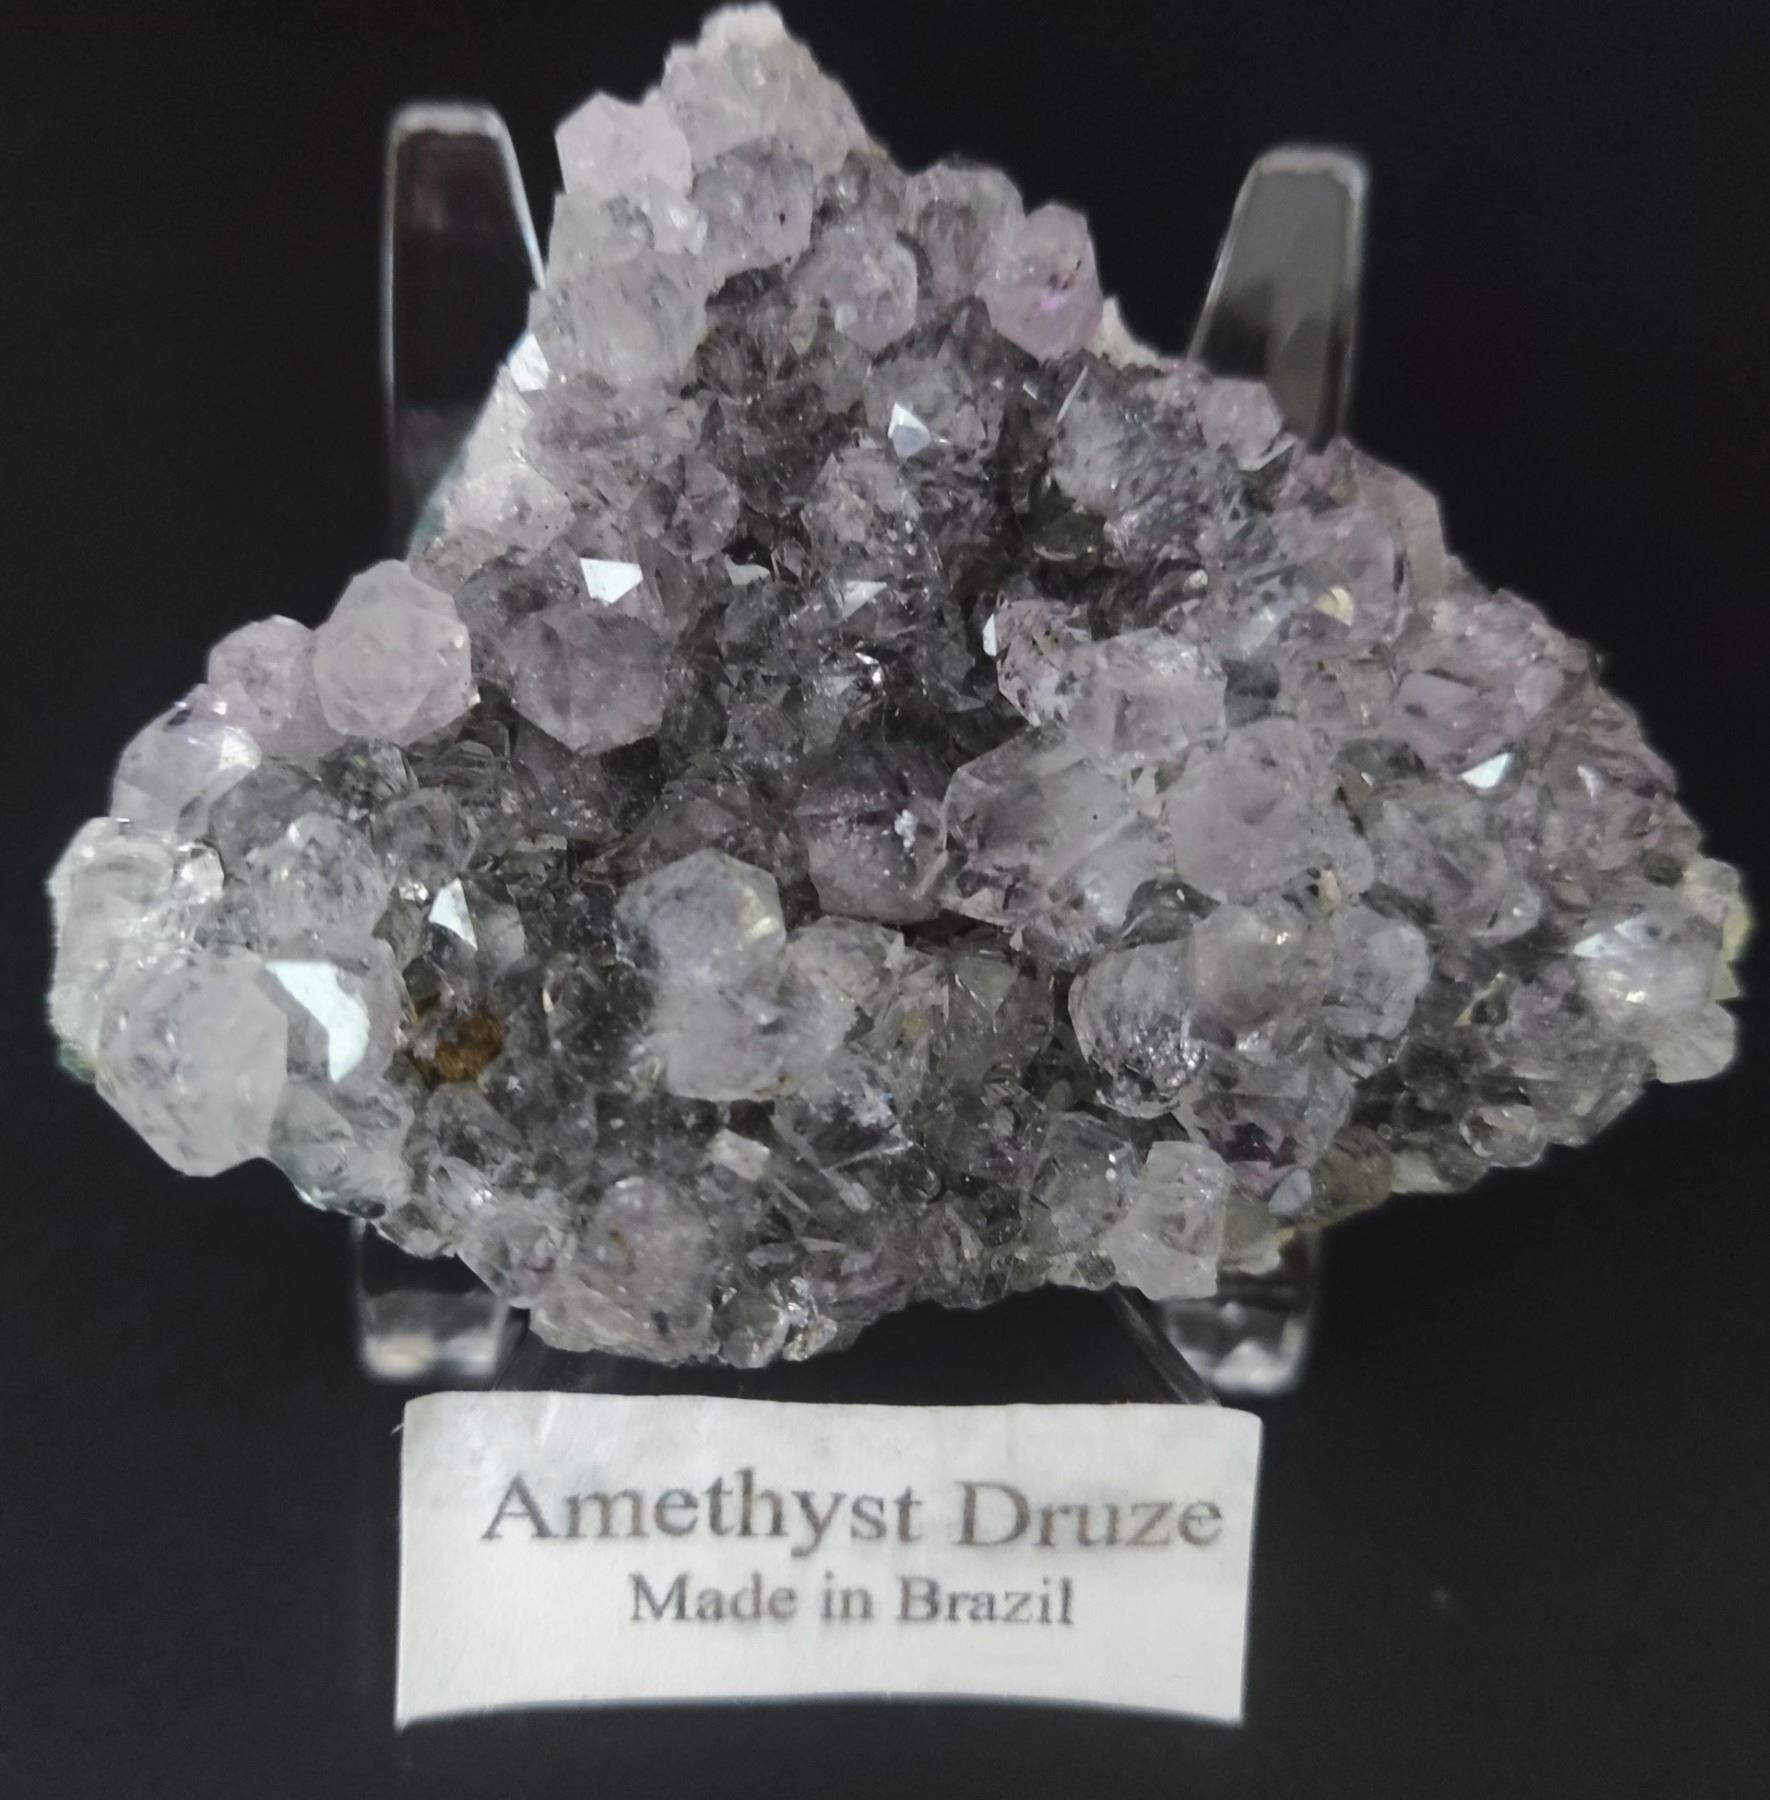 An Amethyst Druze crystal from Brazil, 7cm by 5.